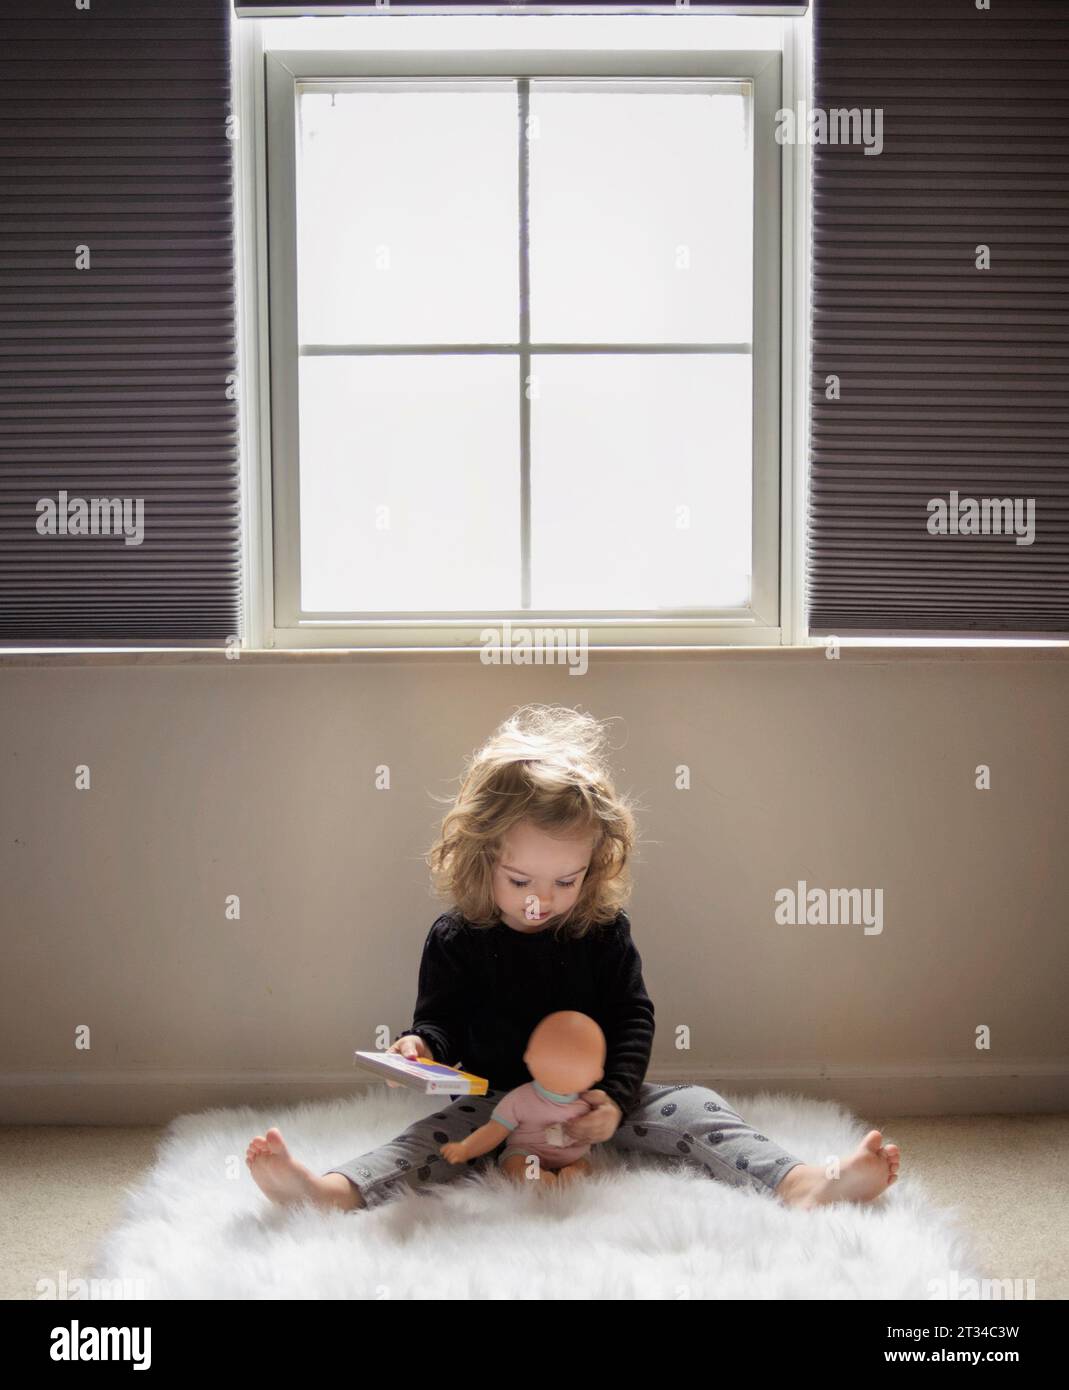 Little girl reading book to baby doll on fuzzy rug Stock Photo